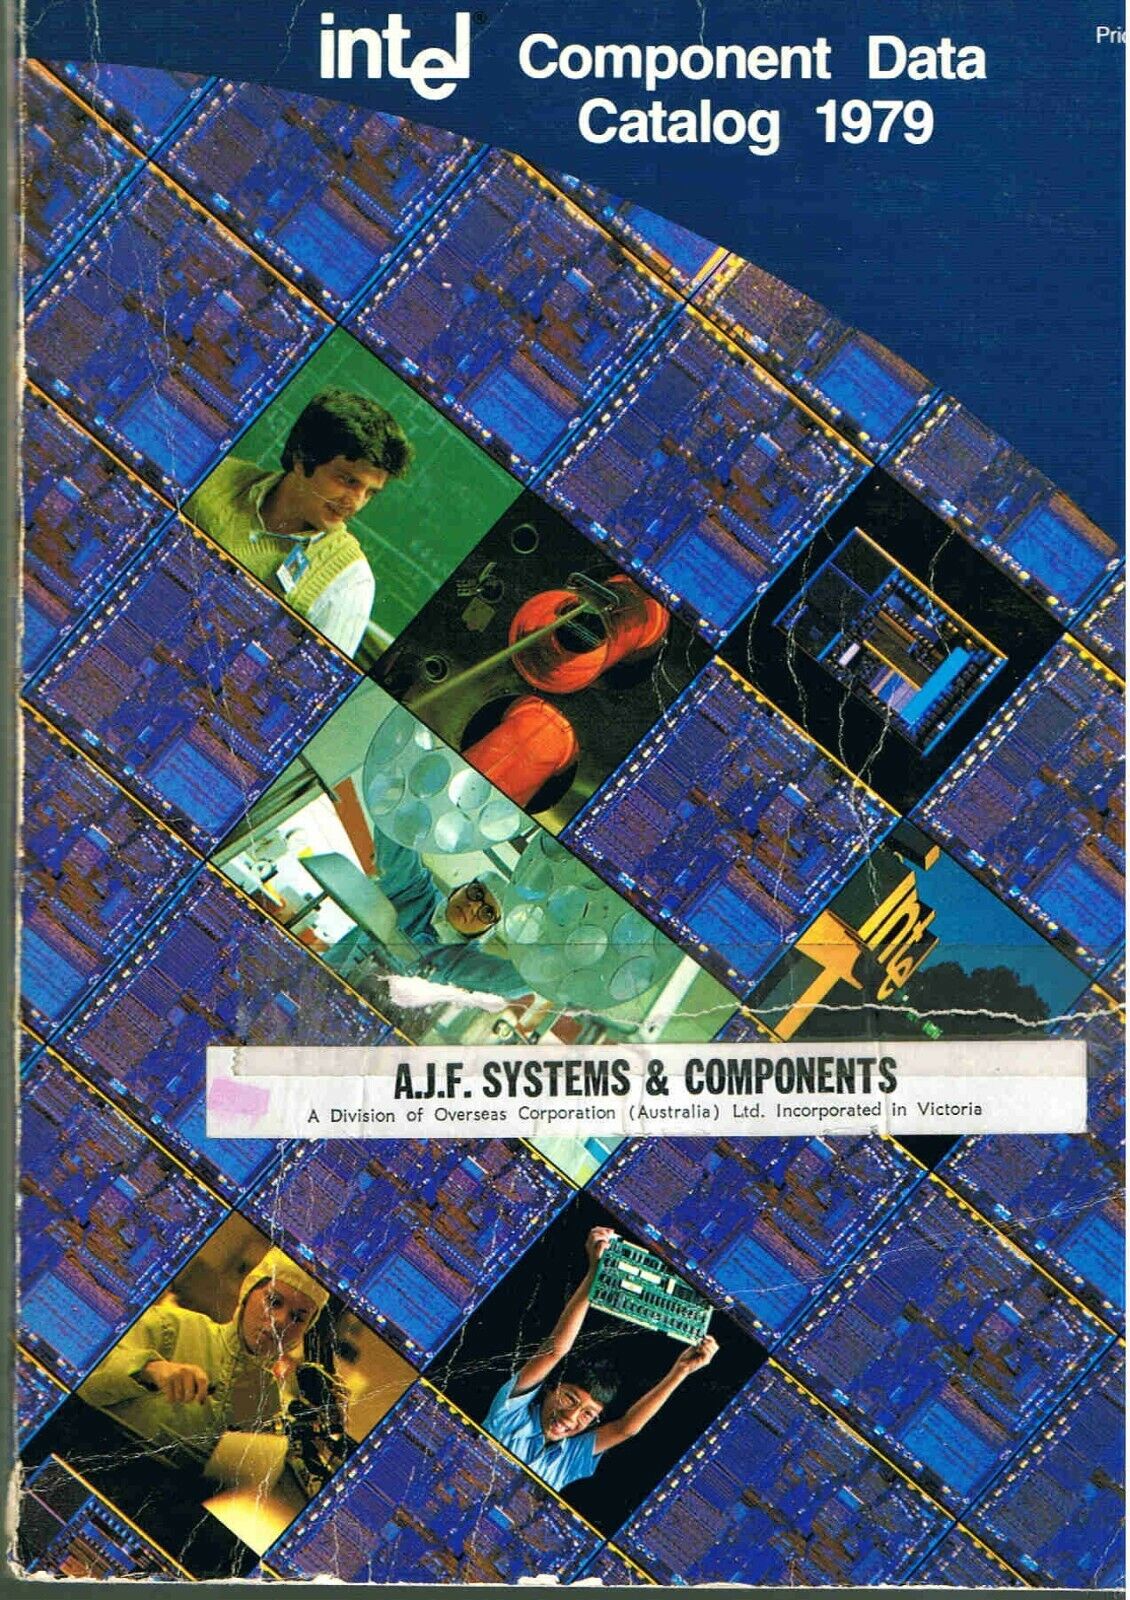 INTEL 1979 COMPONENT DATA CATALOGUE BOOK for Microprocessors/ICs